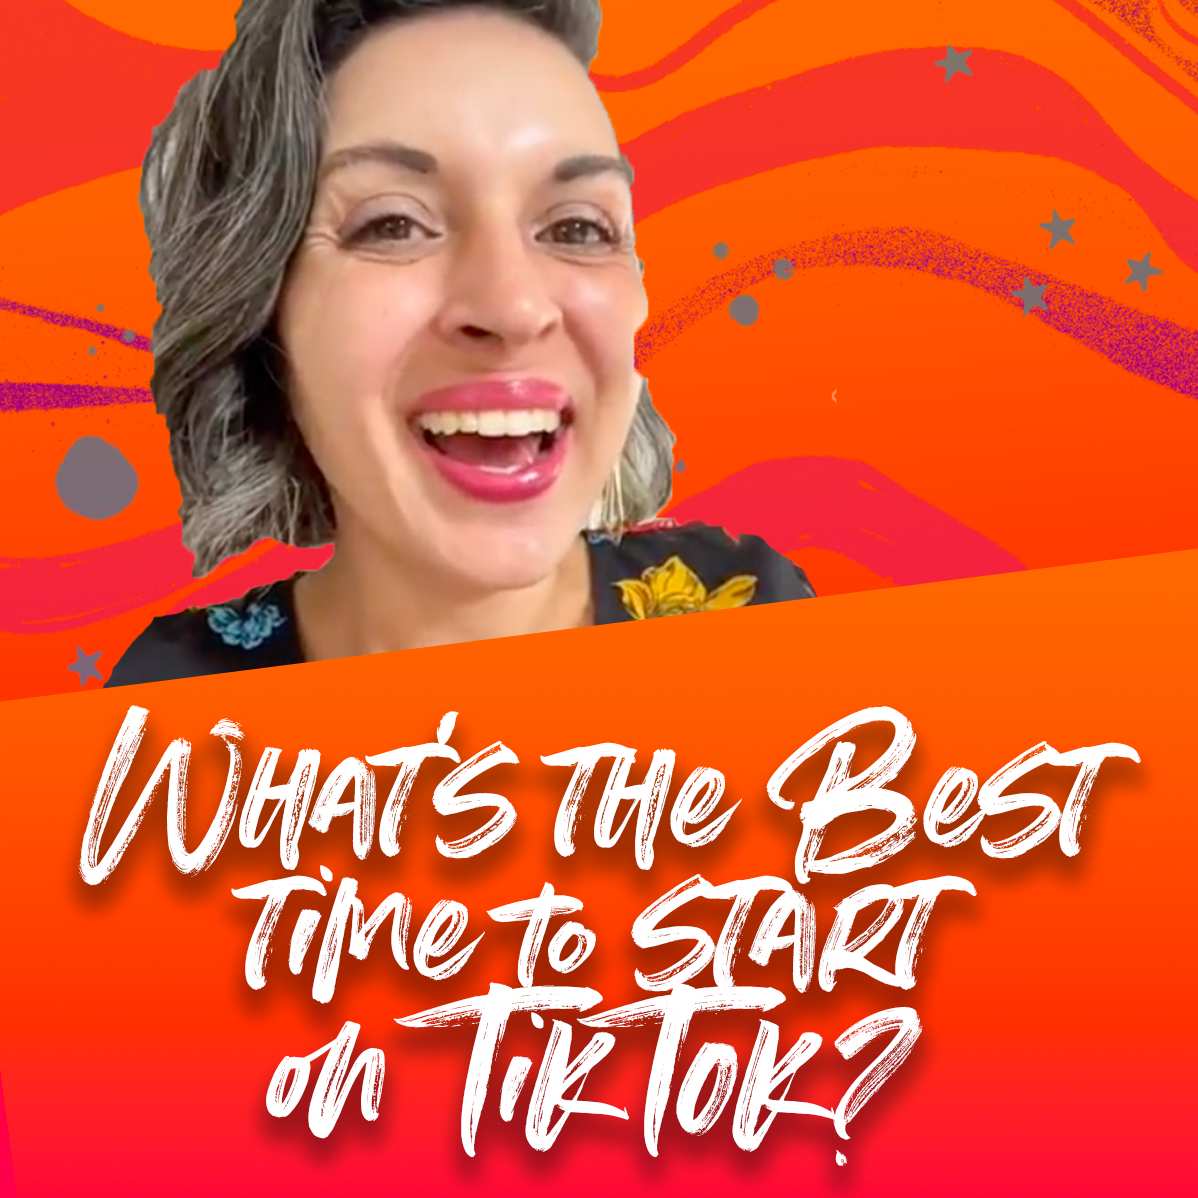 When’s the Best Time to Start on TikTok?